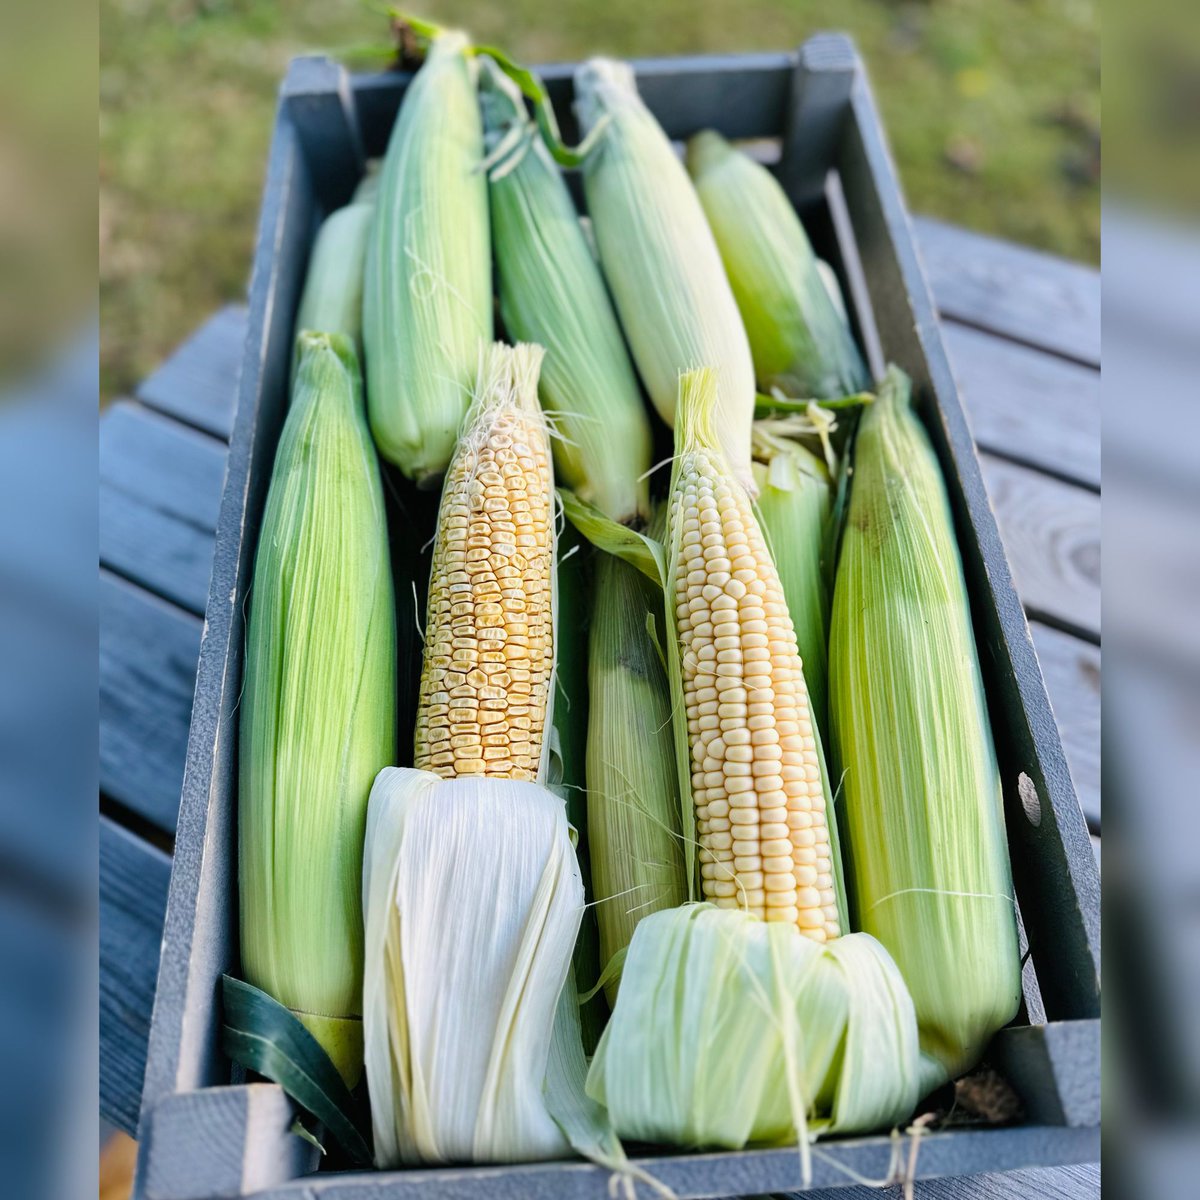 🌽🌾Savour the sweetness with our fresh corn on the cob! Bursting with flavour & packed with nutrients, it's the perfect addition to your barbecue or picnic spread. Grill it, boil it, or enjoy it straight off the cob! #FreshCorn  #HealthyEating #ShopLocal #Tonbridge #Haywards1990